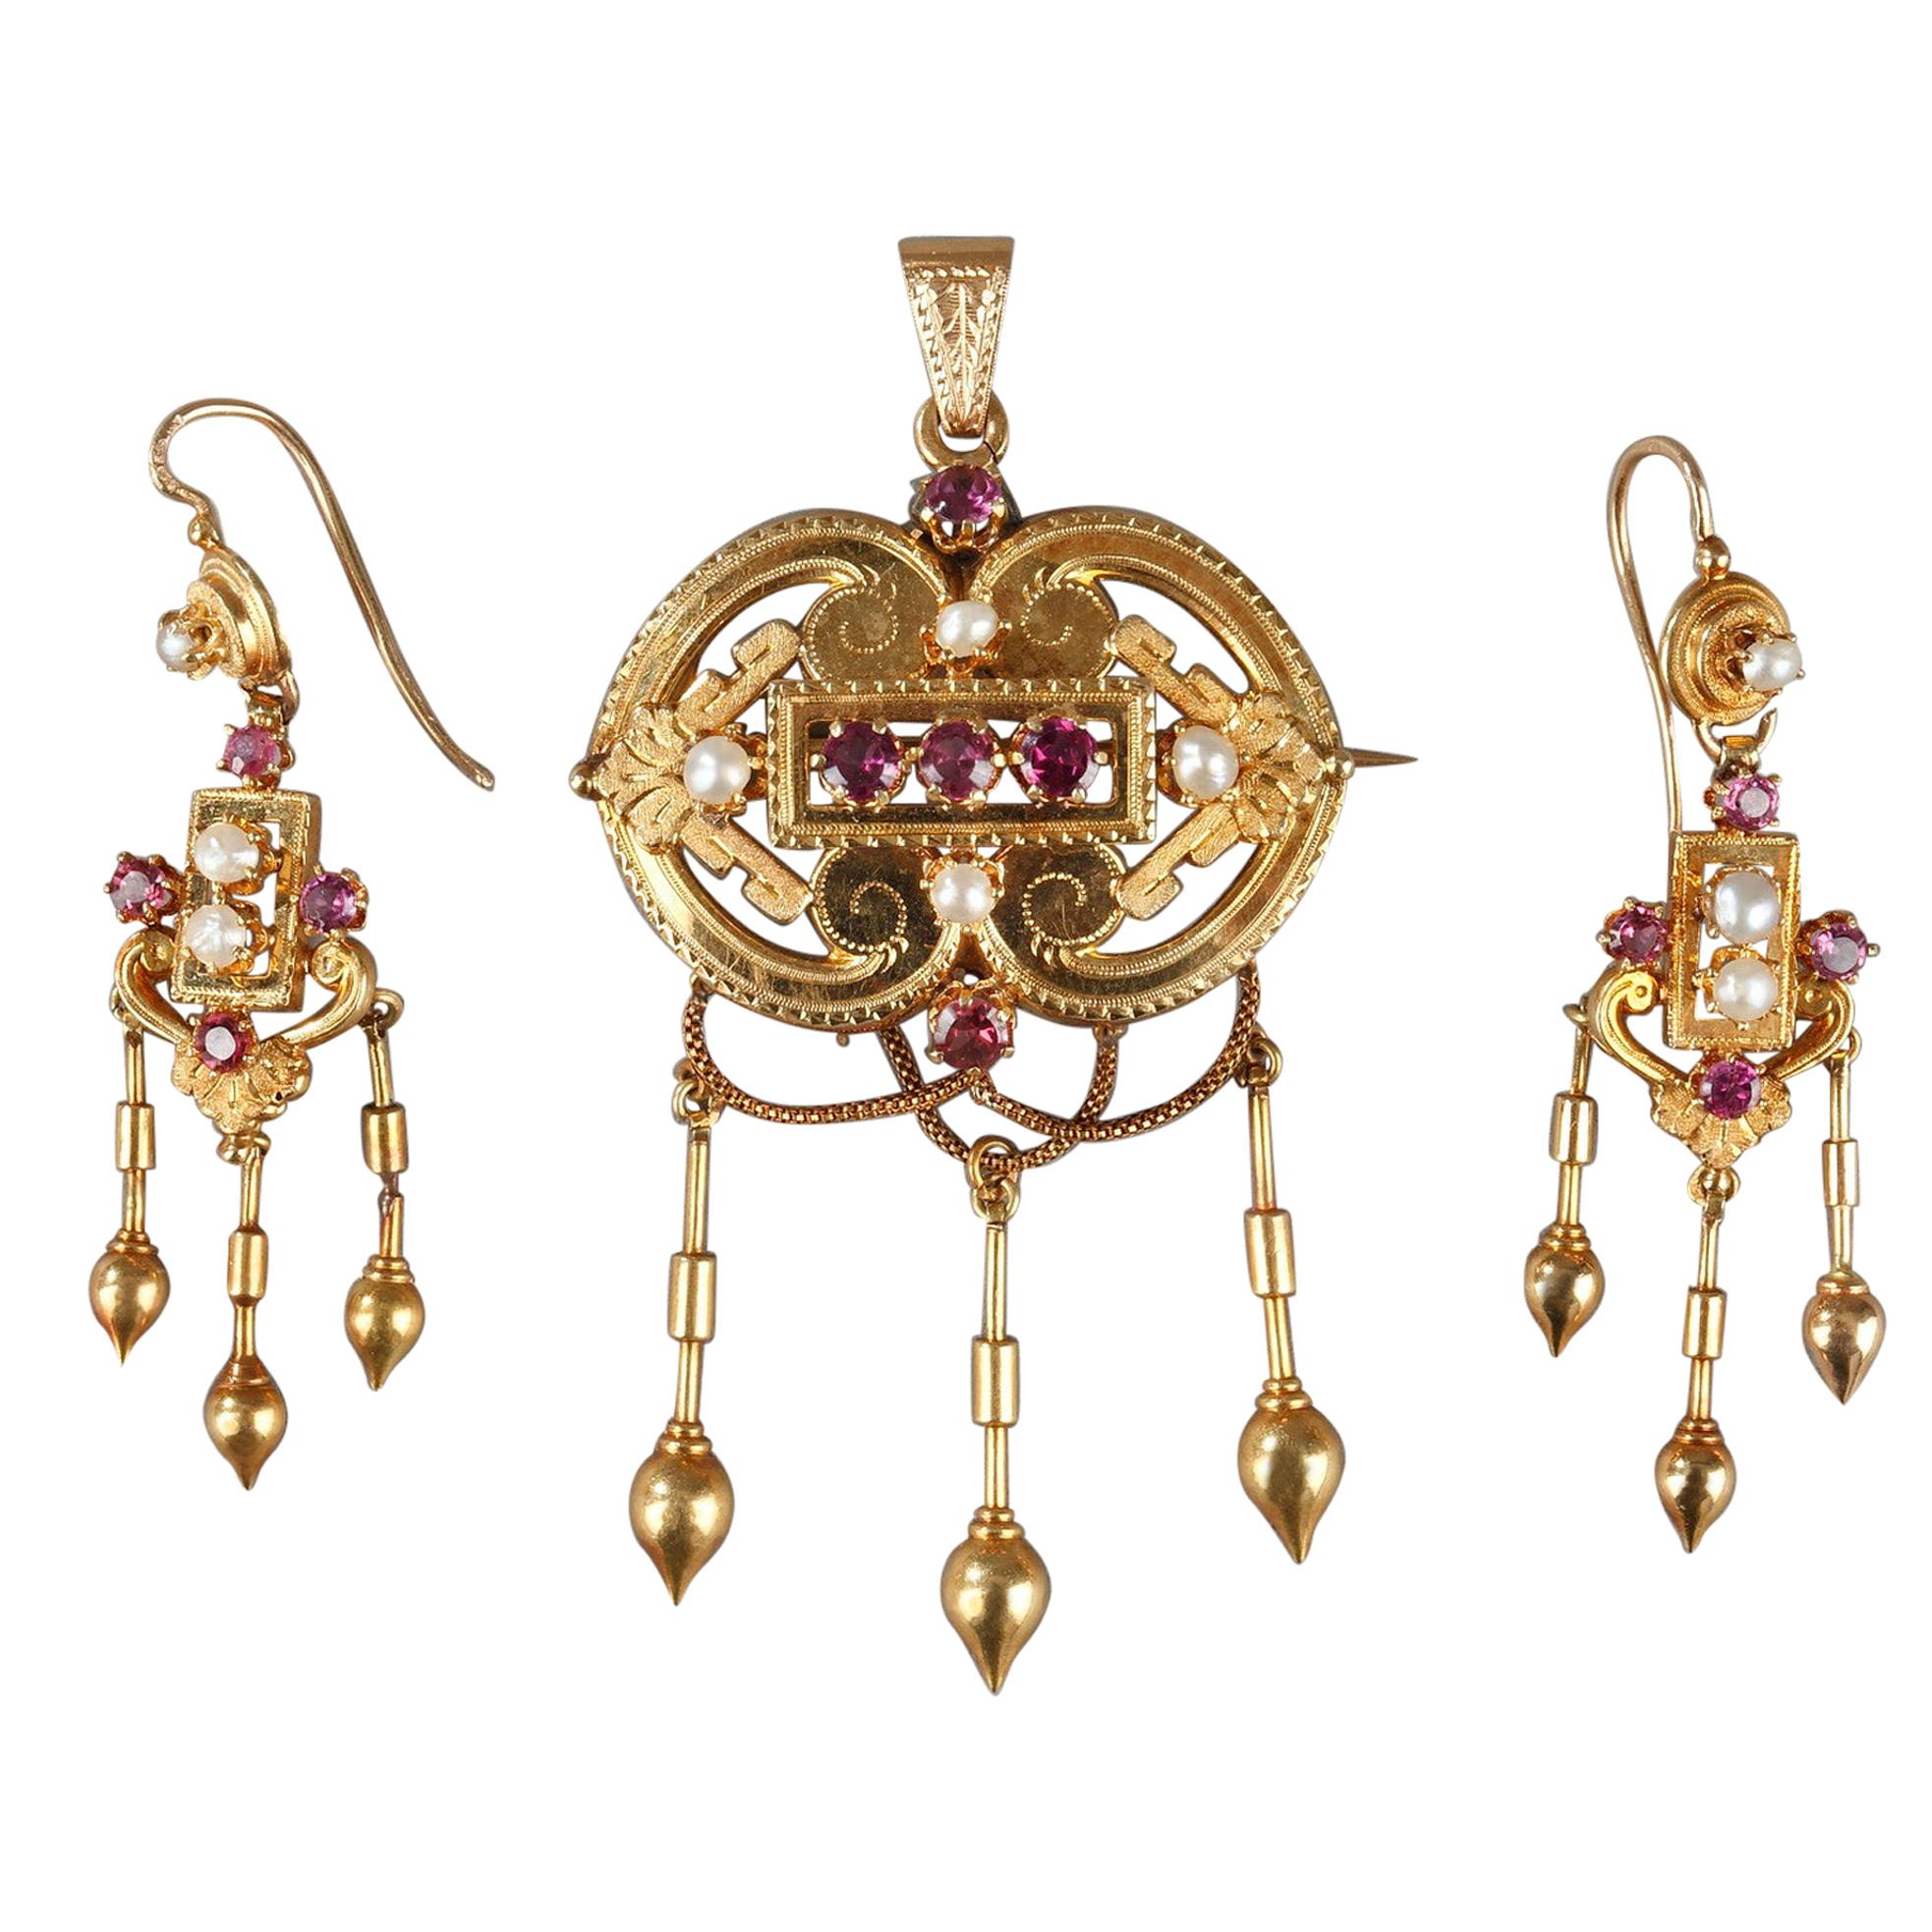 Demi-Parure in Gold, Pearls and Gems Stones, Napoleon III For Sale